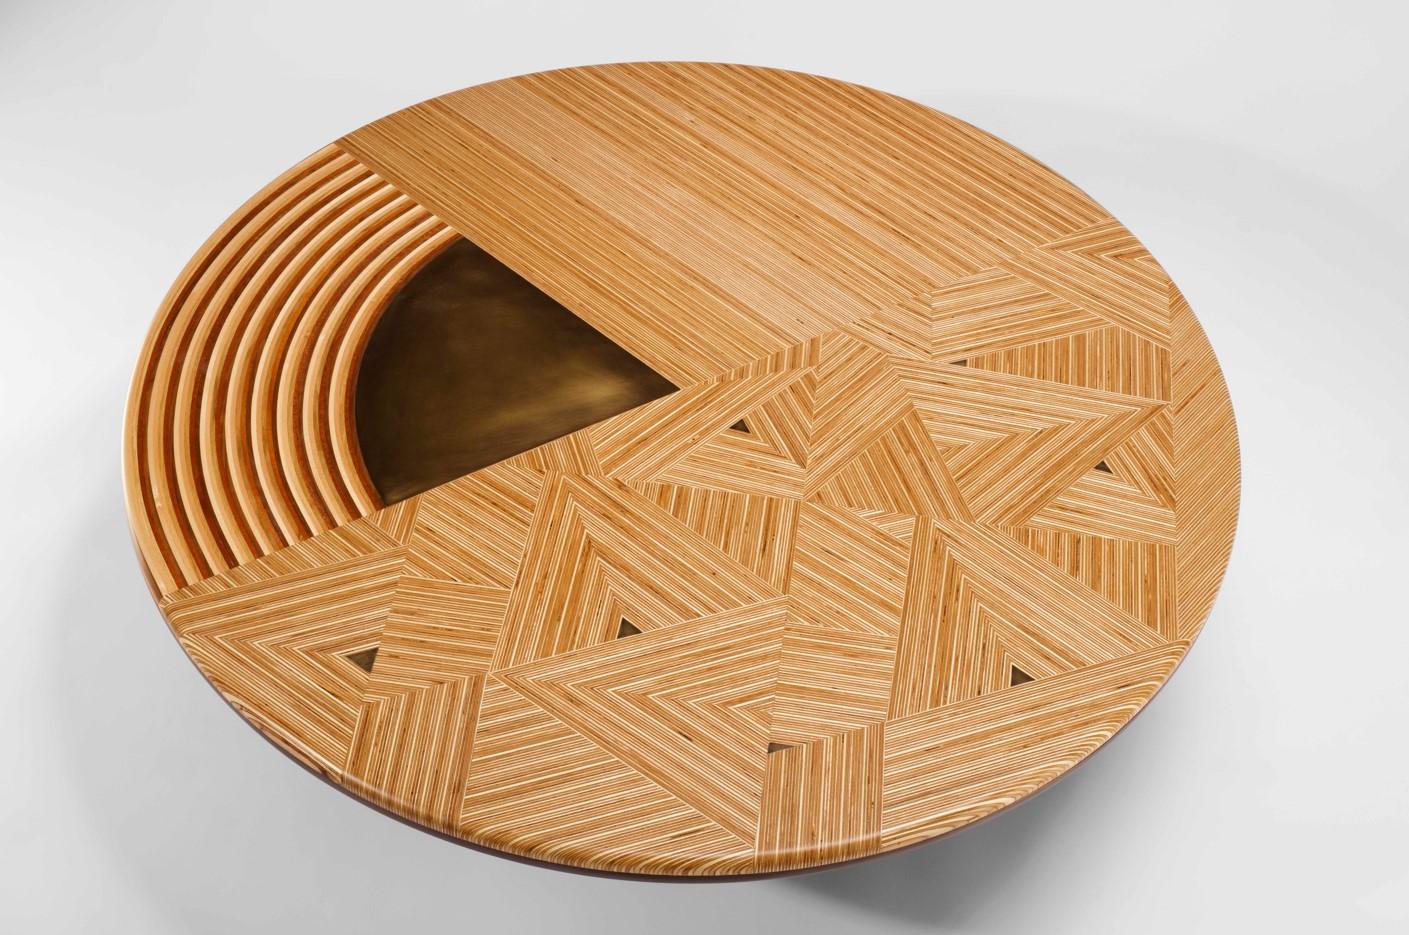 The coffee table crafted by Georges Mohasseb exemplifies a harmonious fusion of traditional craftsmanship, innovative design, and a meticulous attention to materiality that renders it truly unique and special.

Central to the table's exceptional